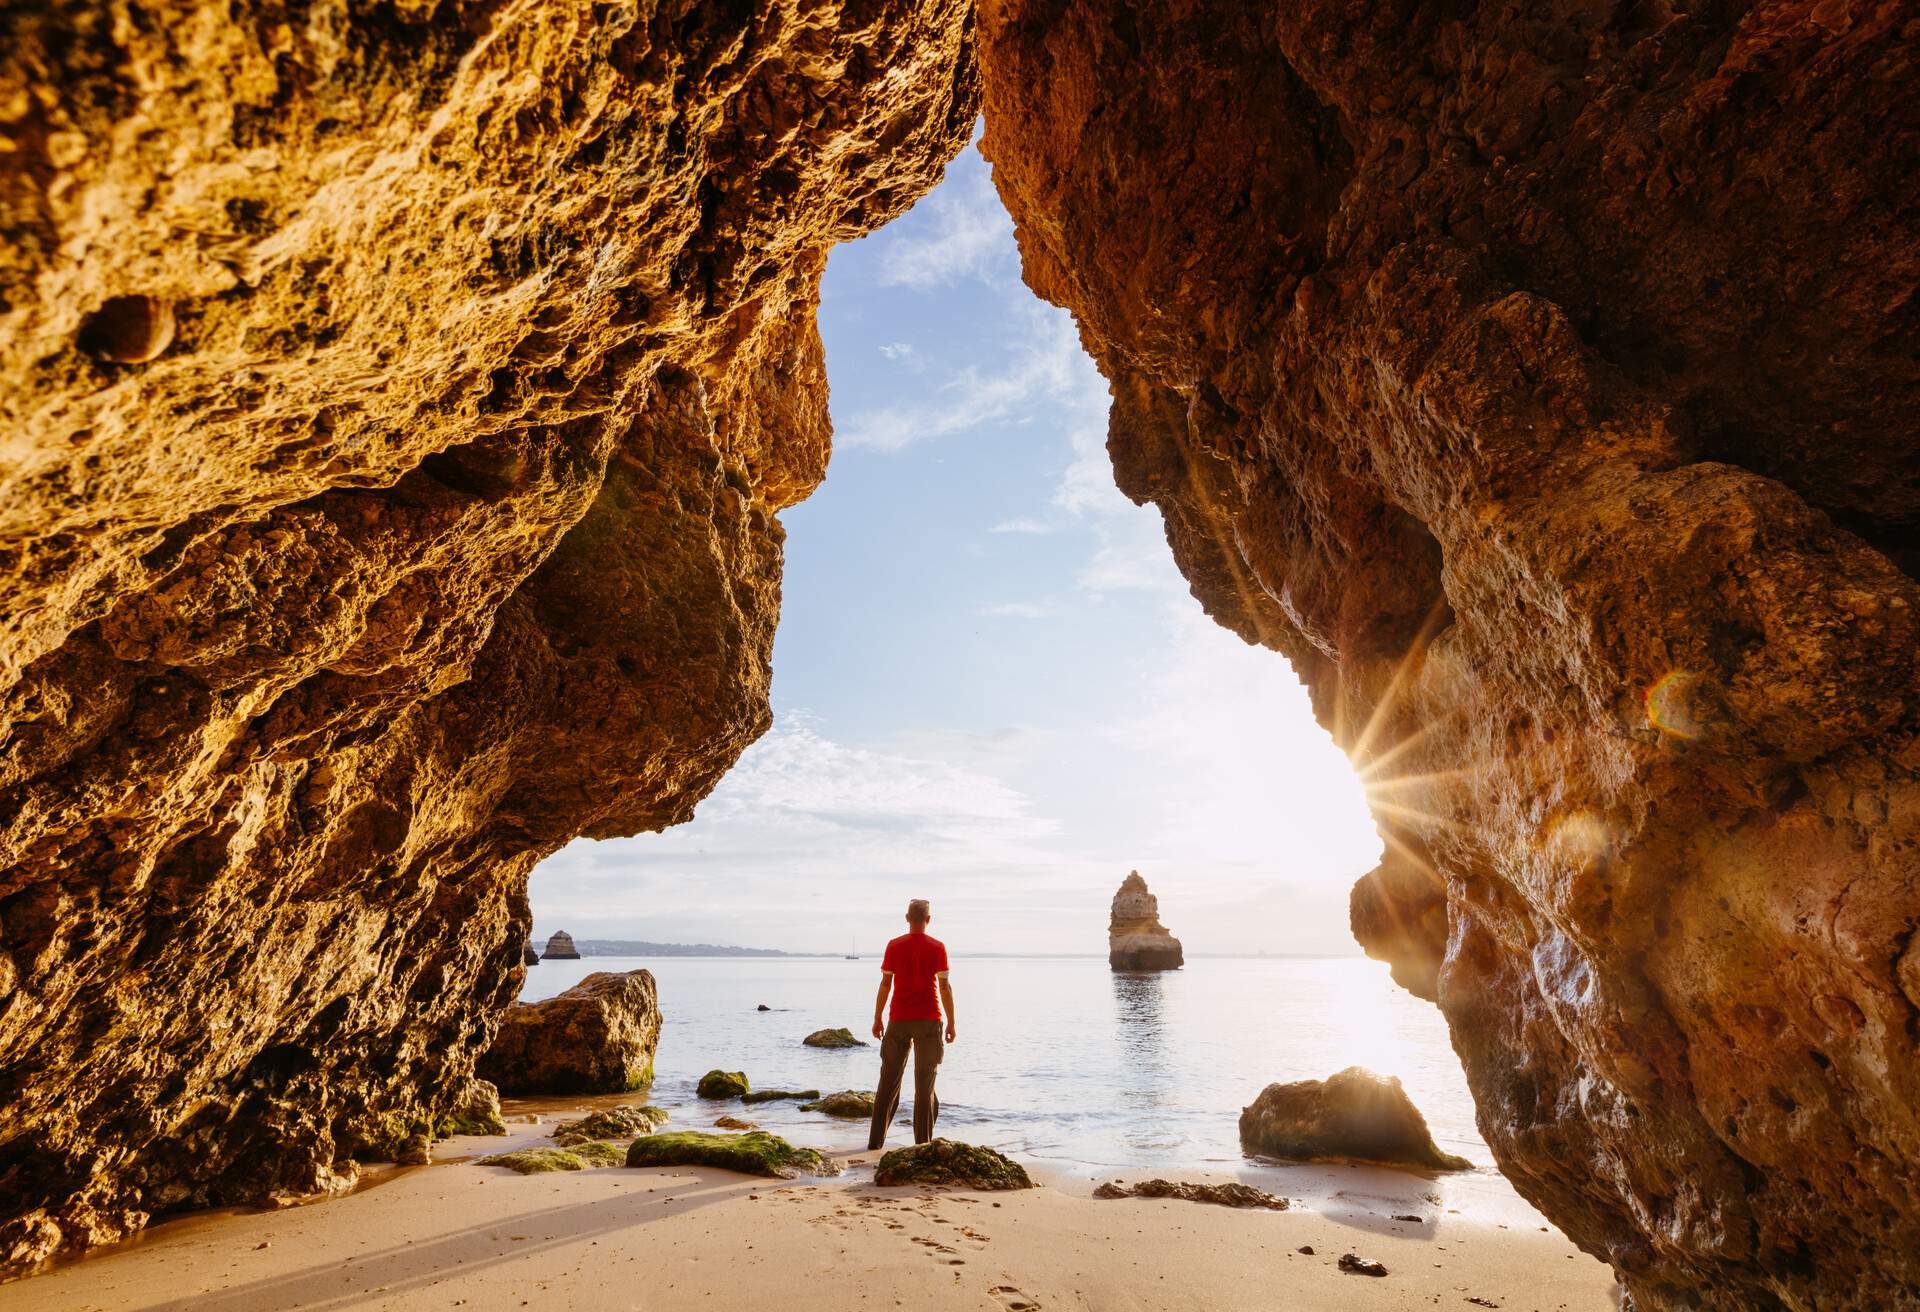 A man in a red shirt stands in the middle of the cave mouth enjoying the sunrise.